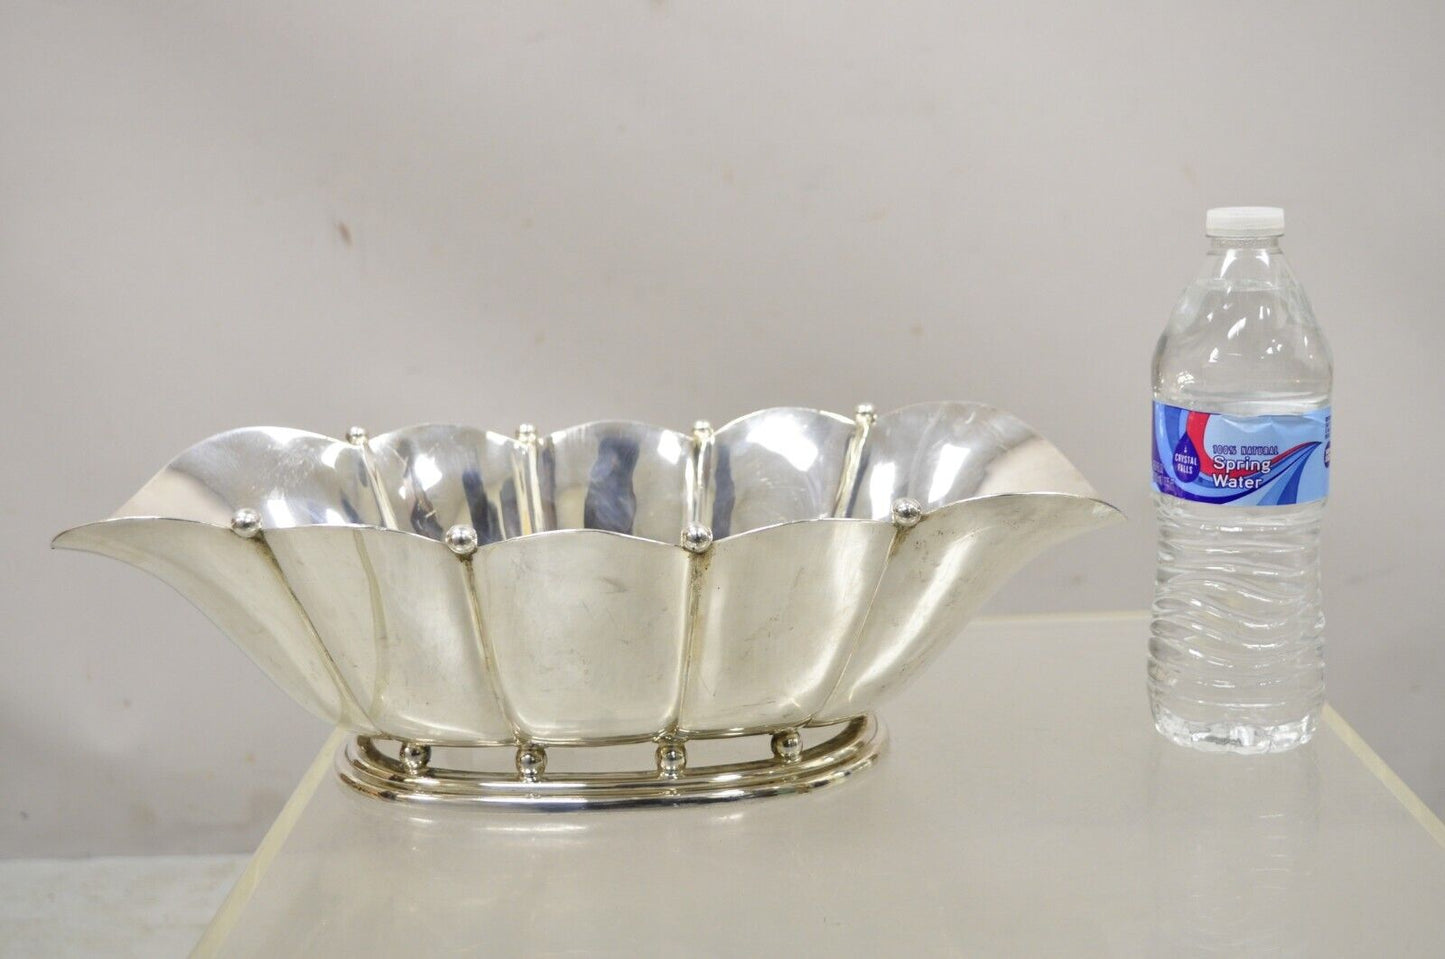 Vintage Reed & Barton Silver Plated Scalloped Fluted Large Fruit Bowl Dish